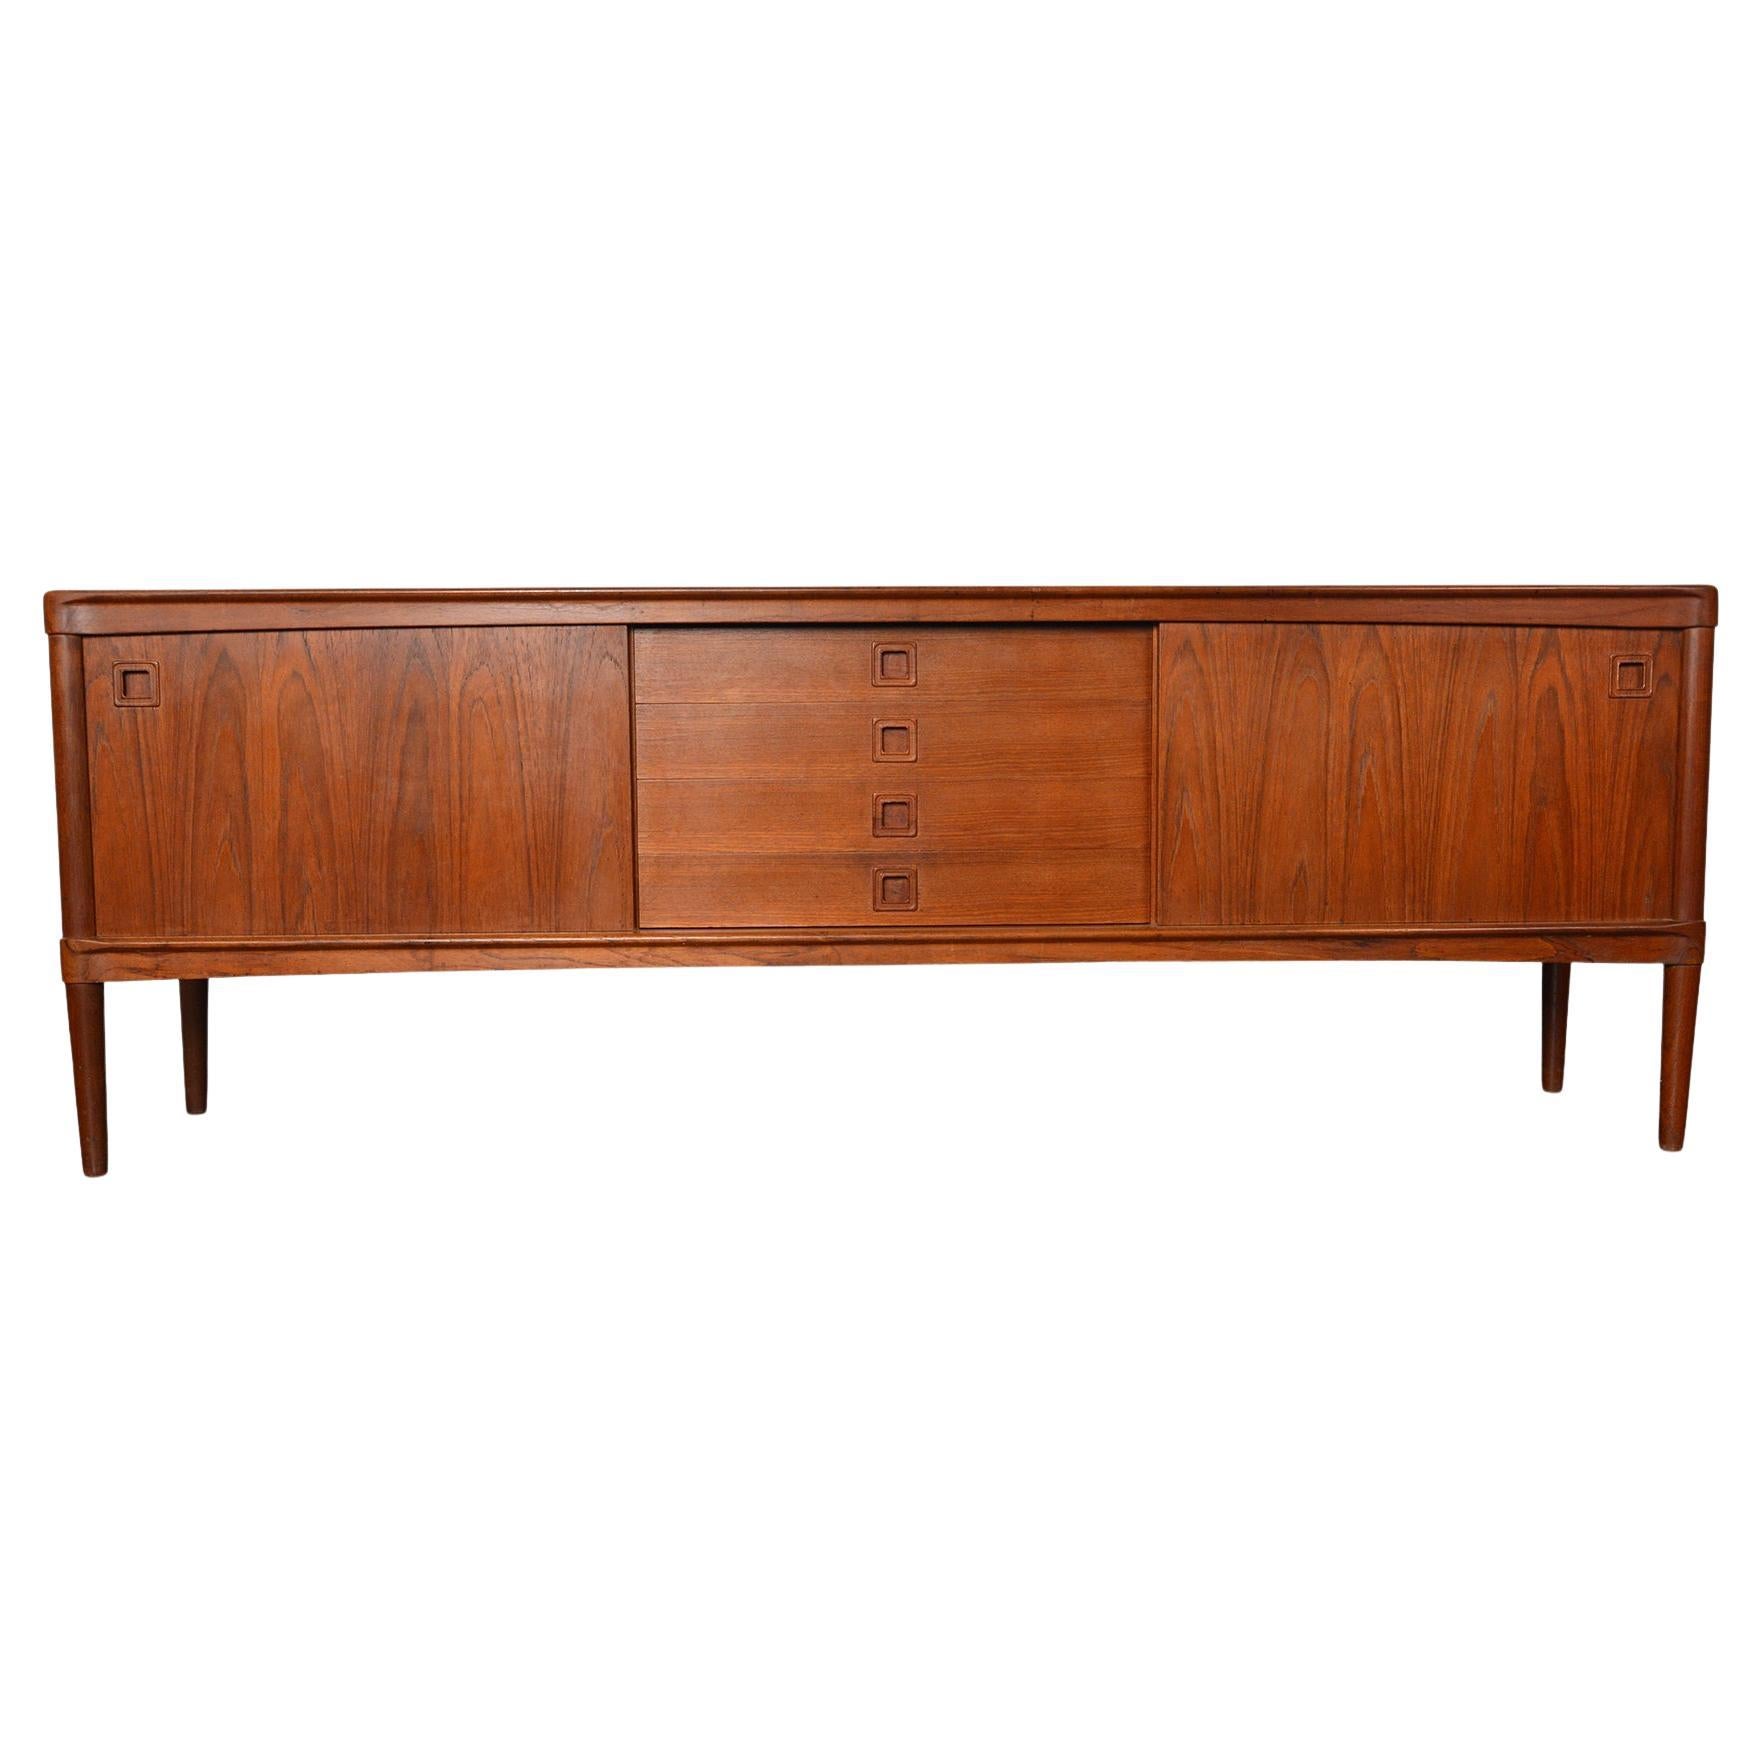 Square Pull Teak Credenza by h.w. Klein #1 For Sale